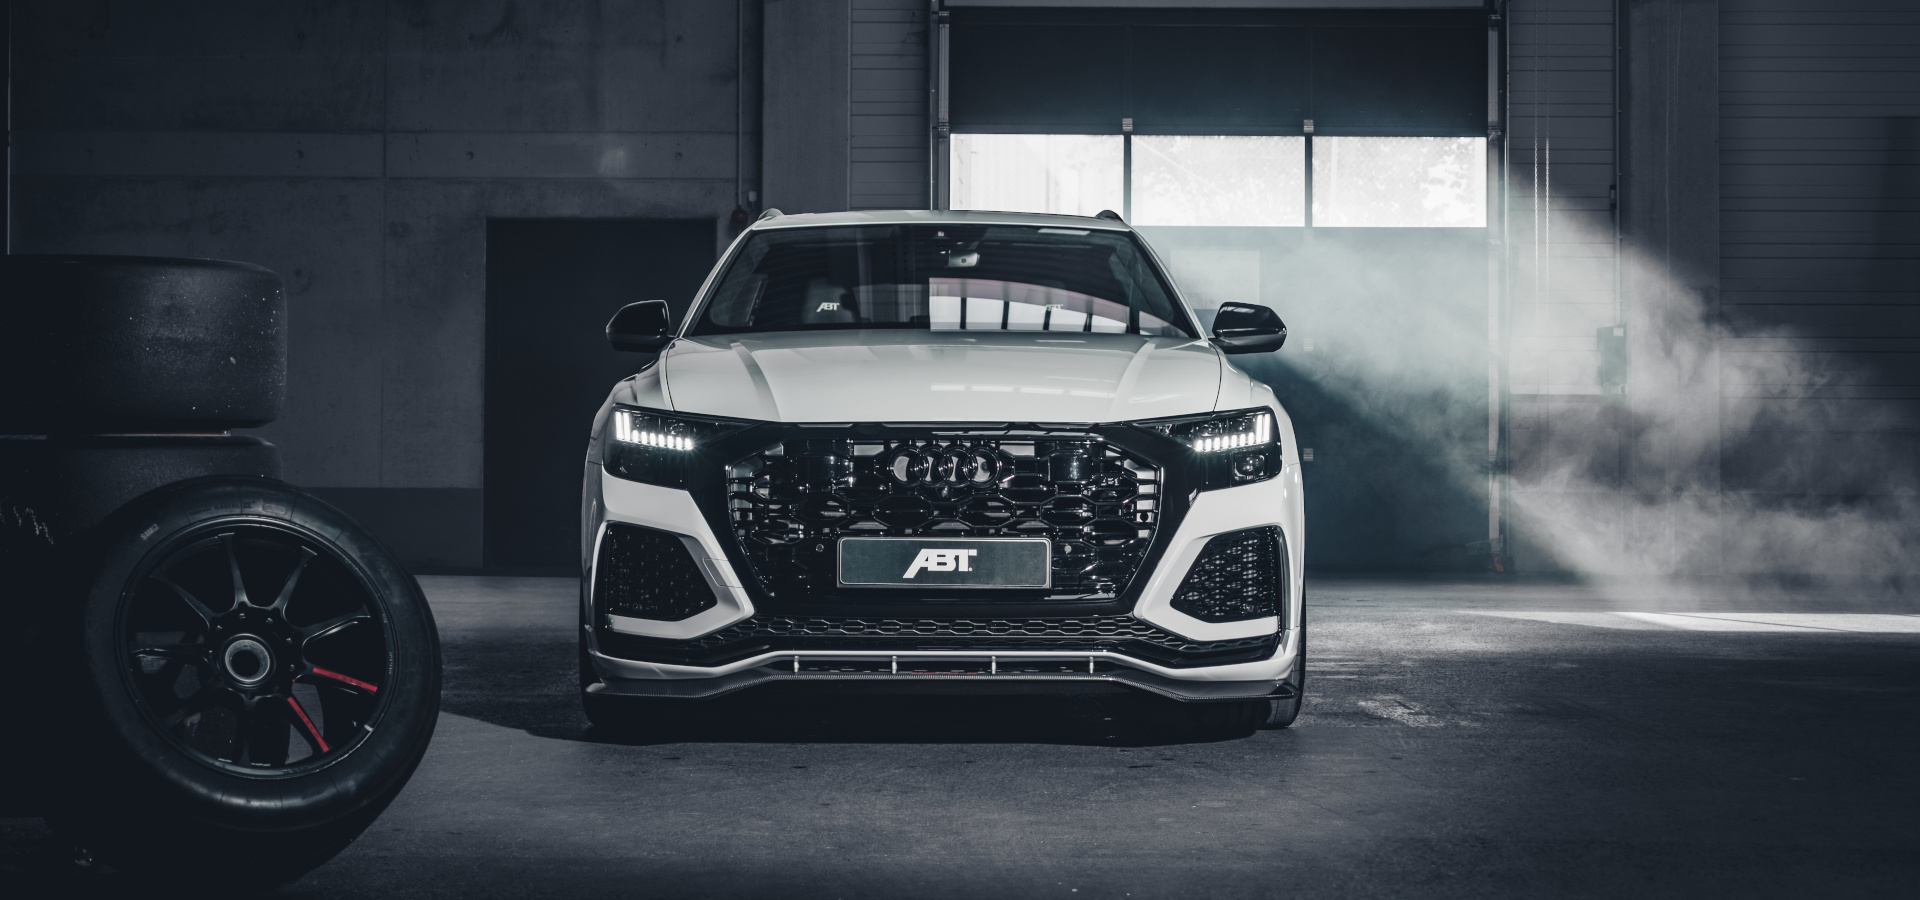 ABT RSQ8-S - Audi Tuning, VW Tuning, Chiptuning von ABT Sportsline.